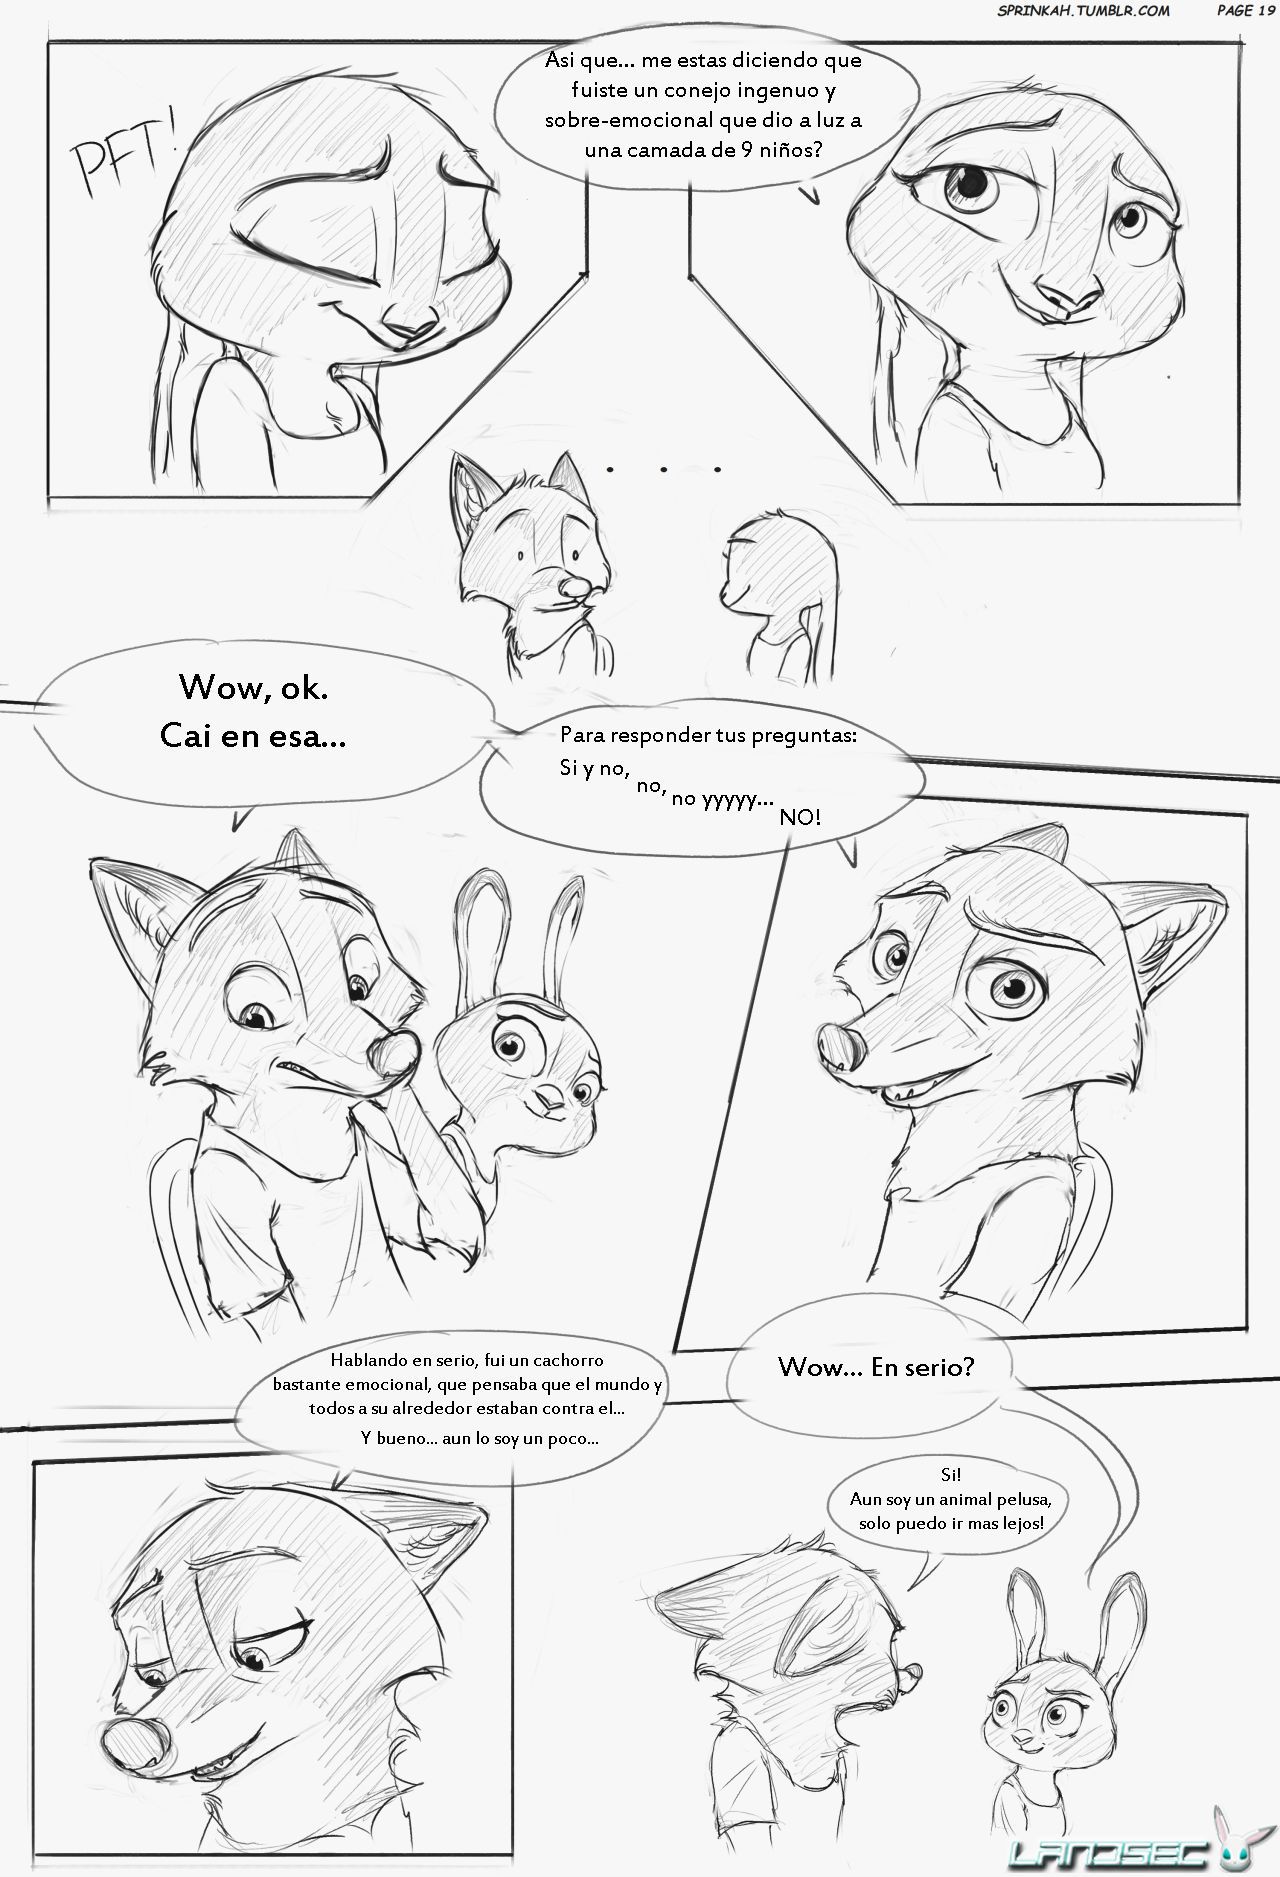 [Sprinkah] This is what true love looks like (Zootopia) (Spanish) (On Going) [Landsec] http://sprinkah.tumblr.com/ 30